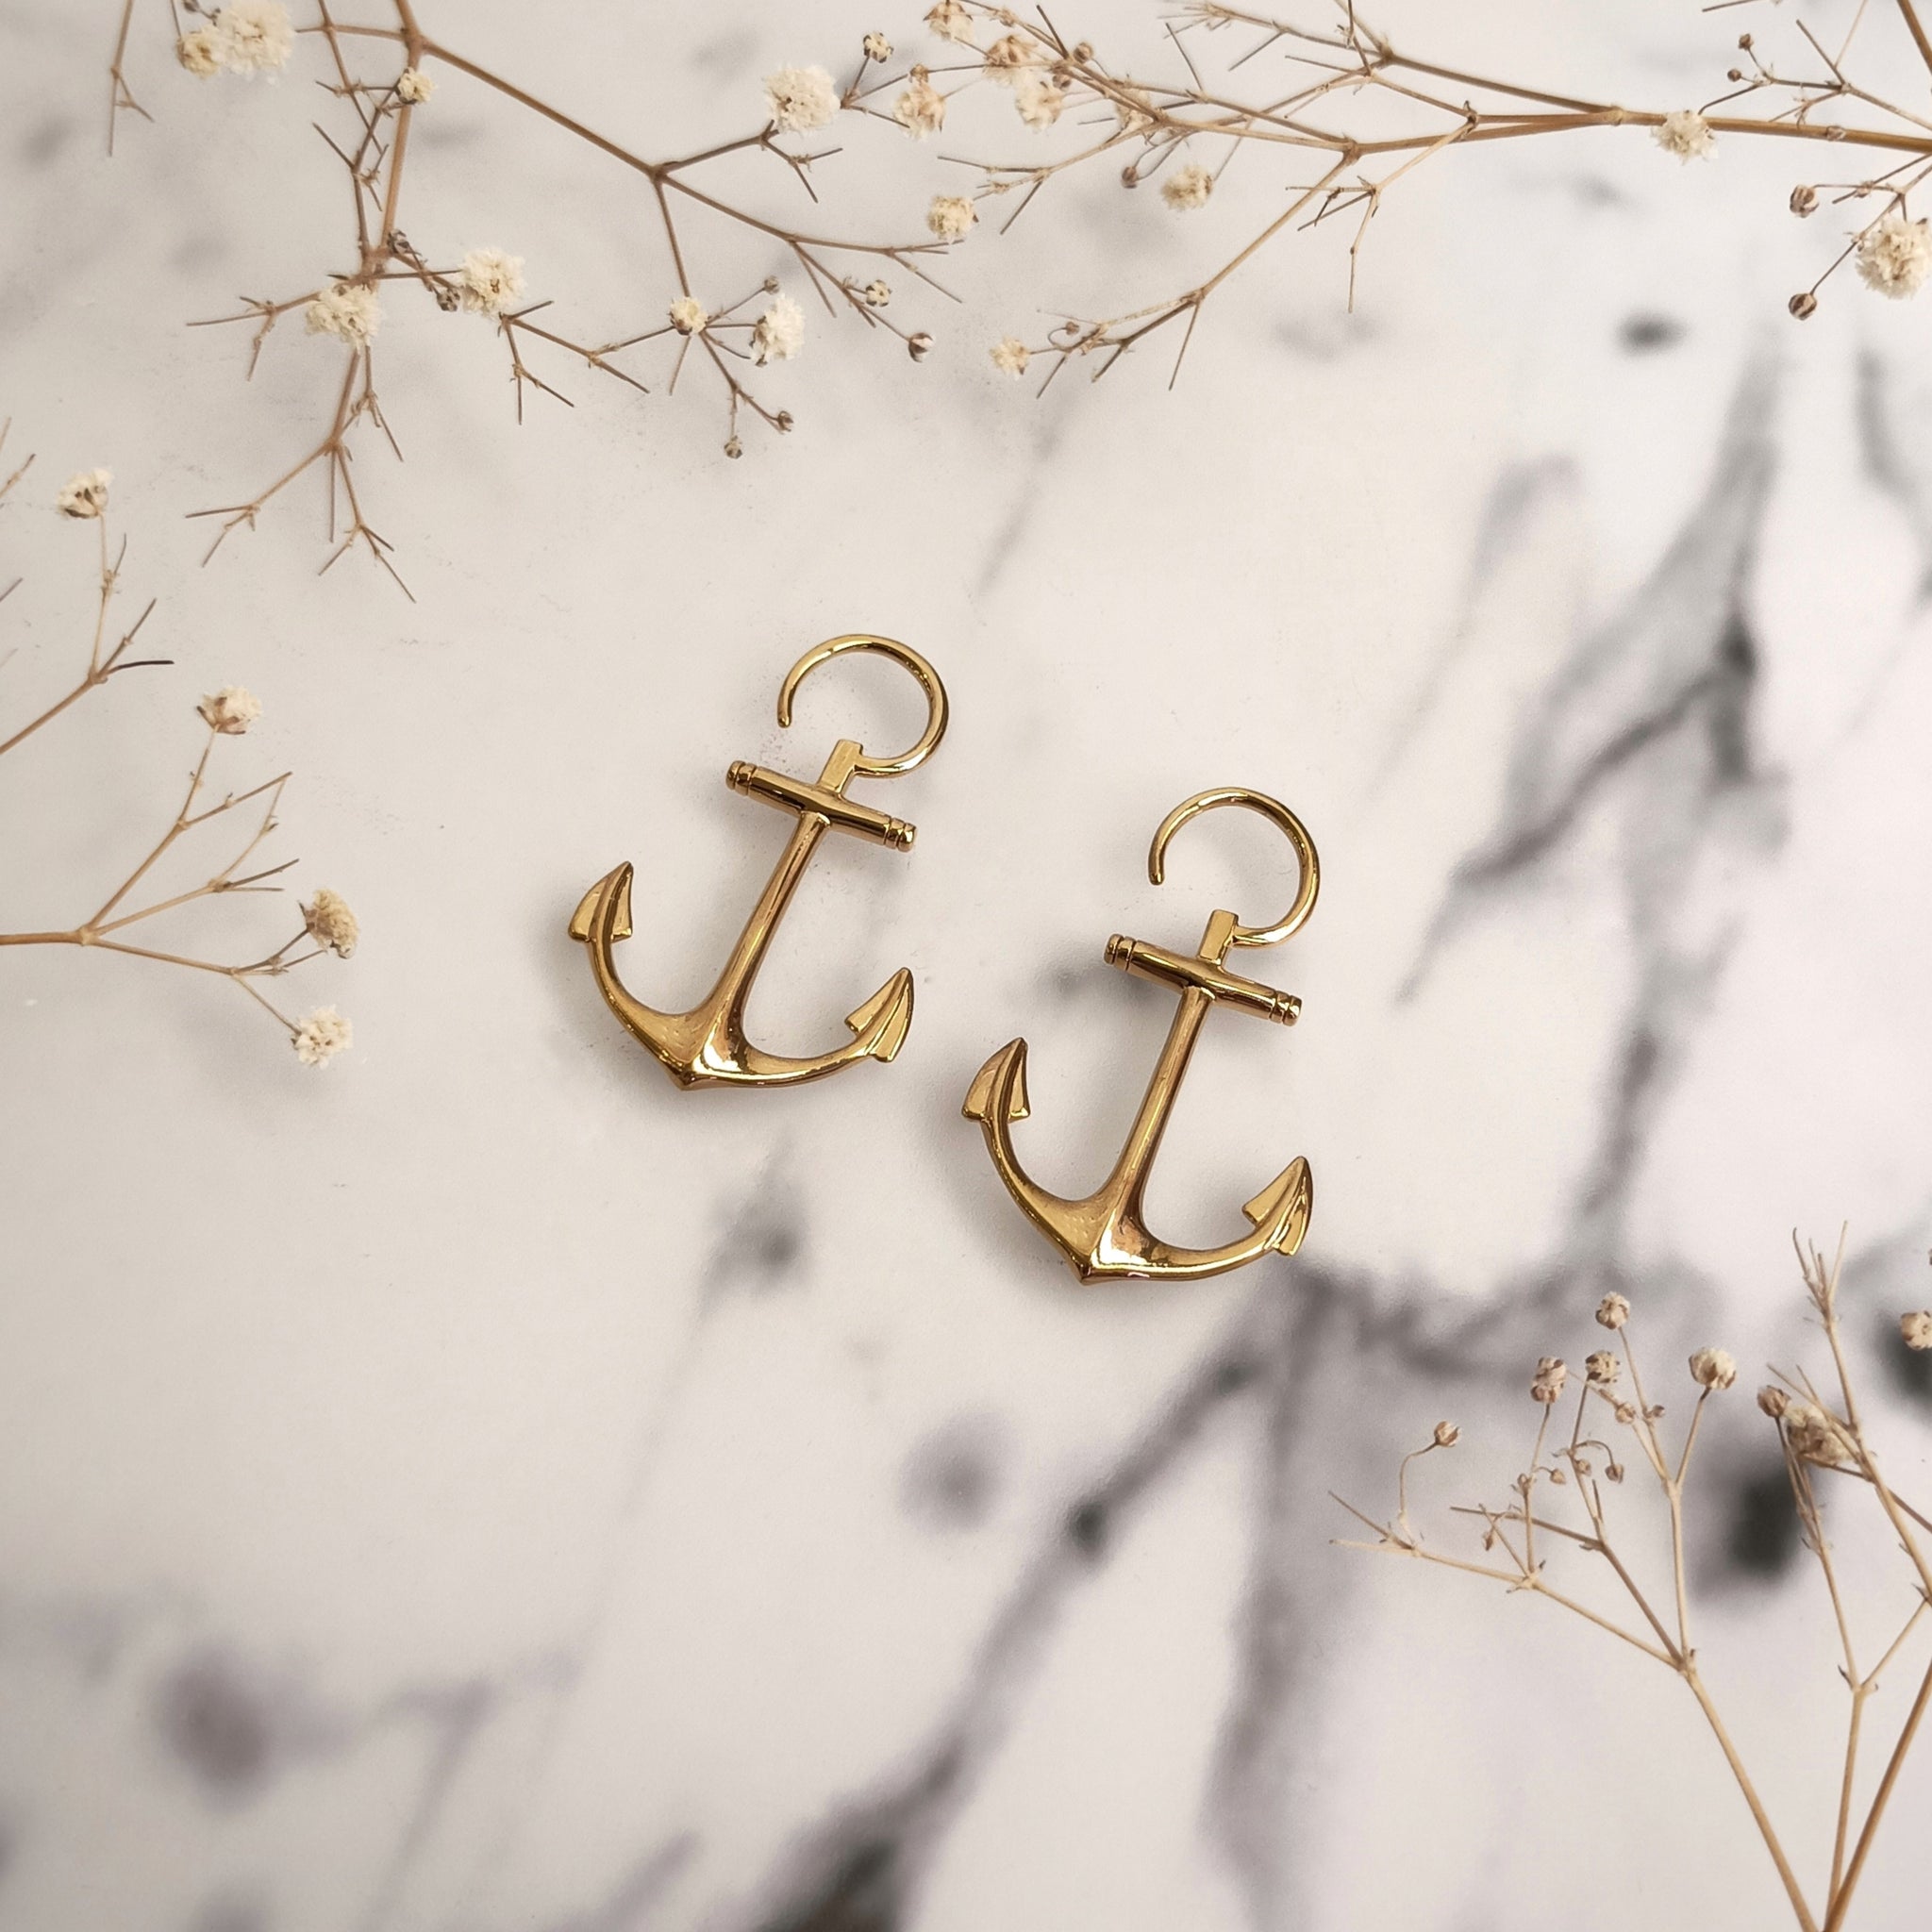 Gold Plated "Anchor" Ear Weights